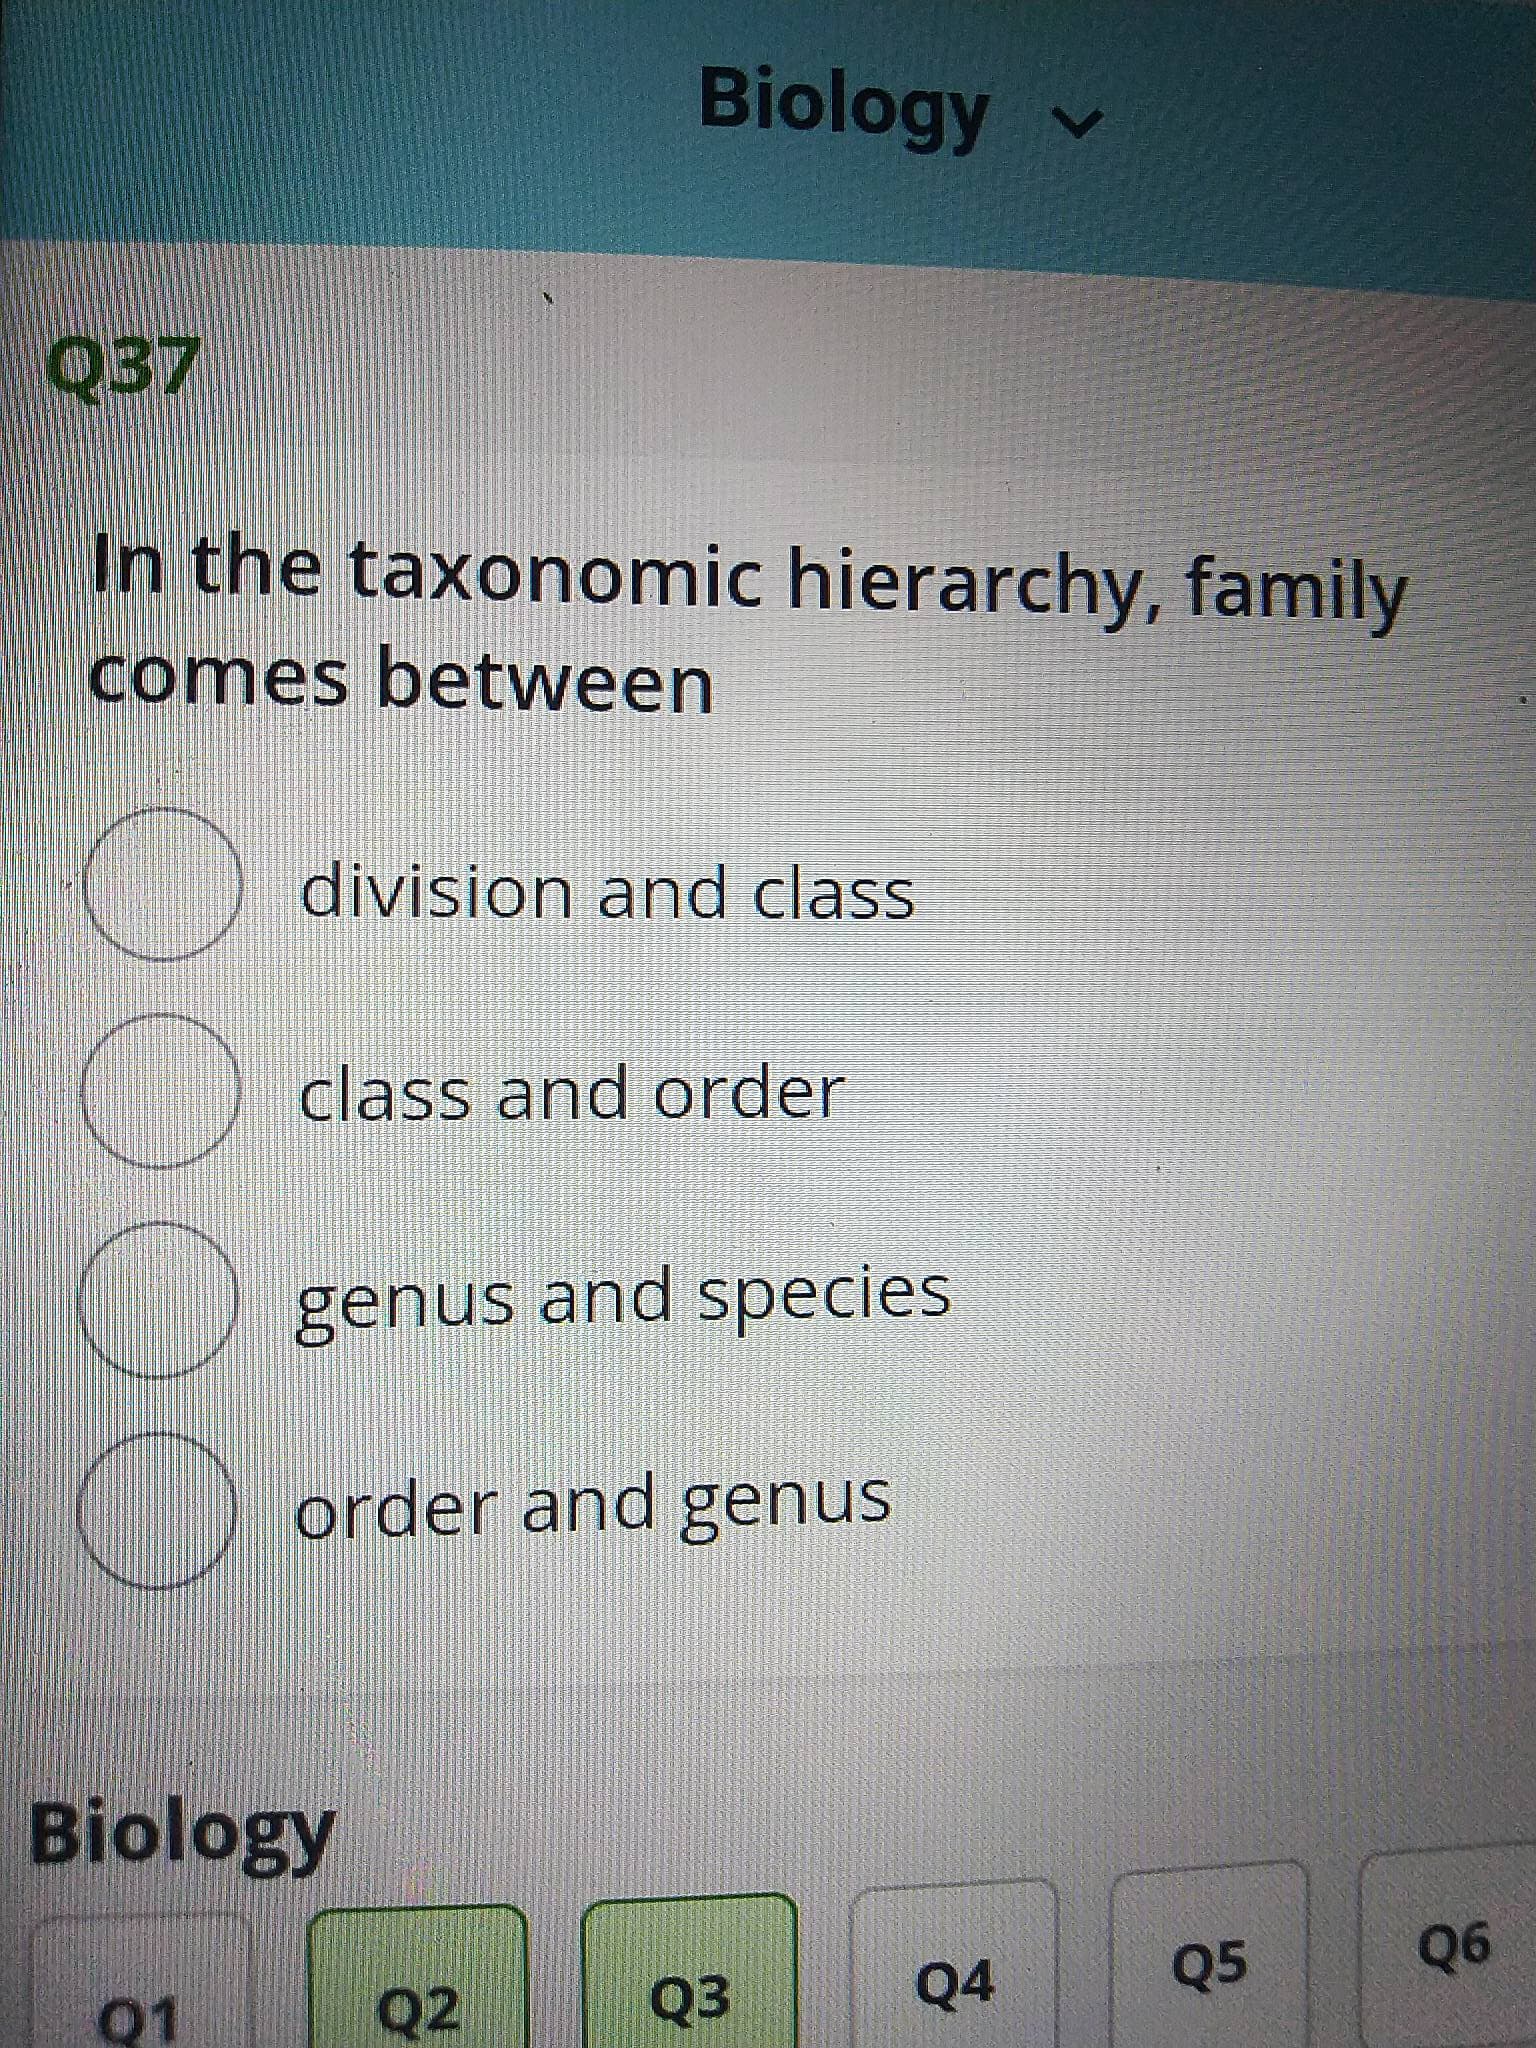 00OO
Biology v
In the taxonomic hierarchy, family
comes between
division and class
class and order
genus and species
order and genus
Biology
Q4
Q5
90
Q2
